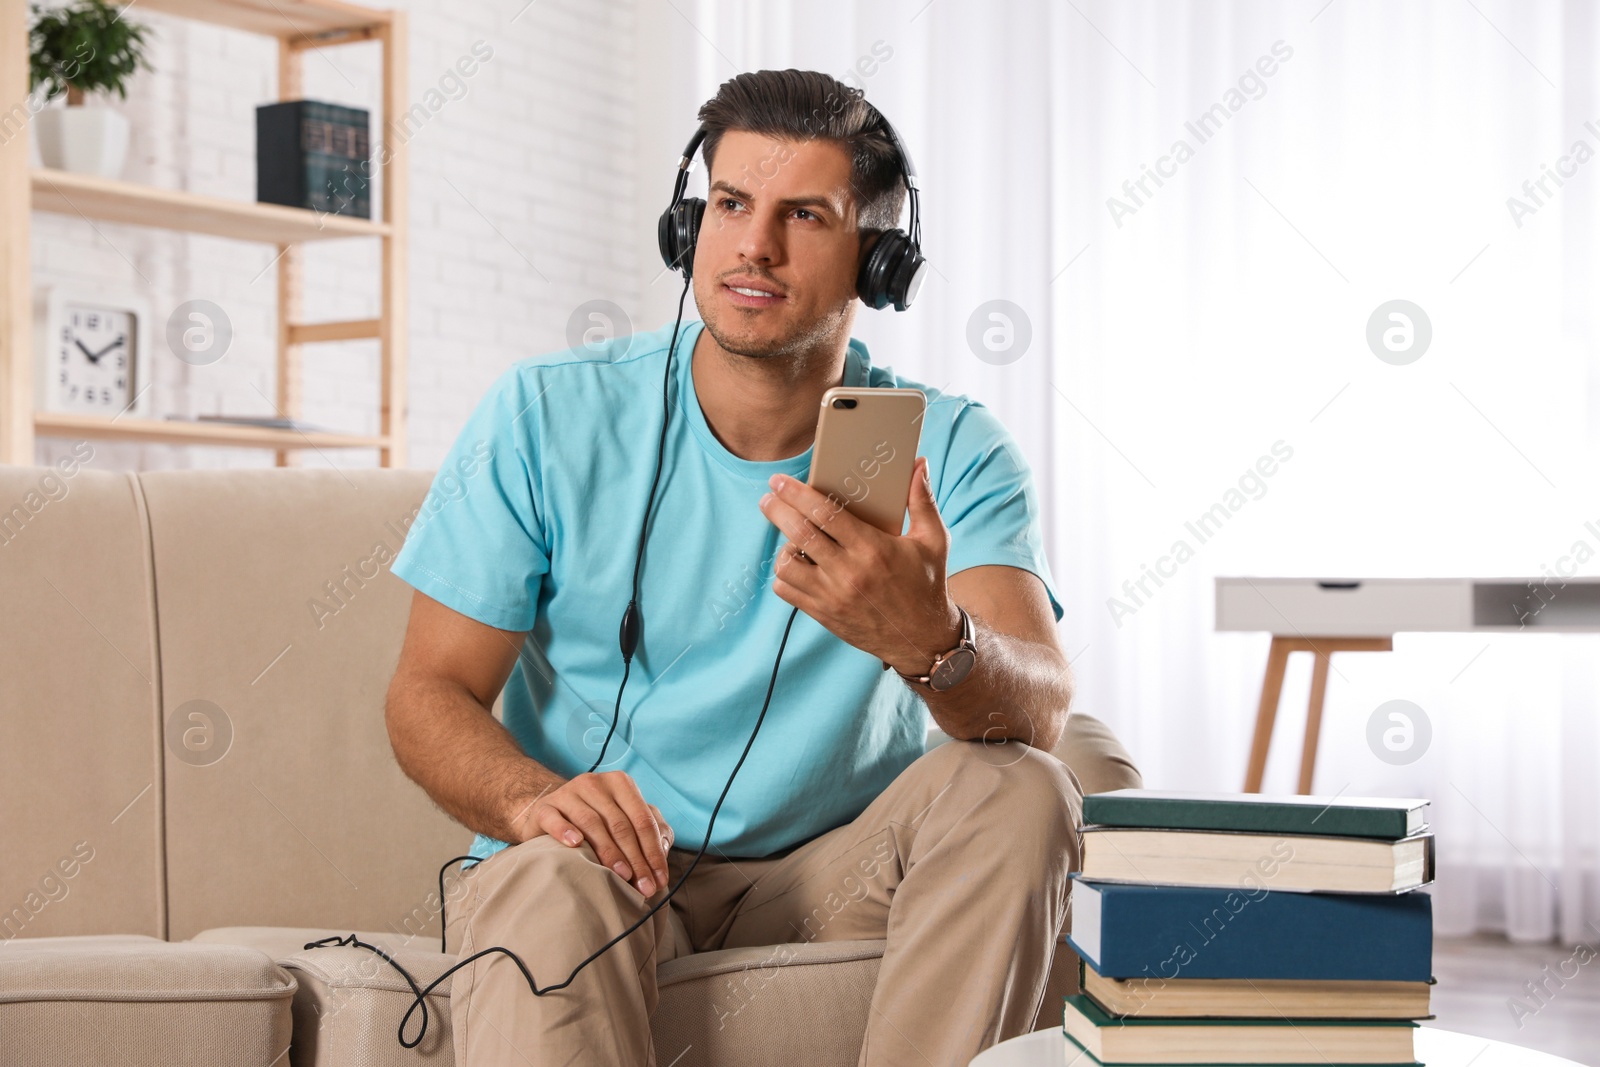 Photo of Man with mobile phone listening to audiobook on sofa indoors